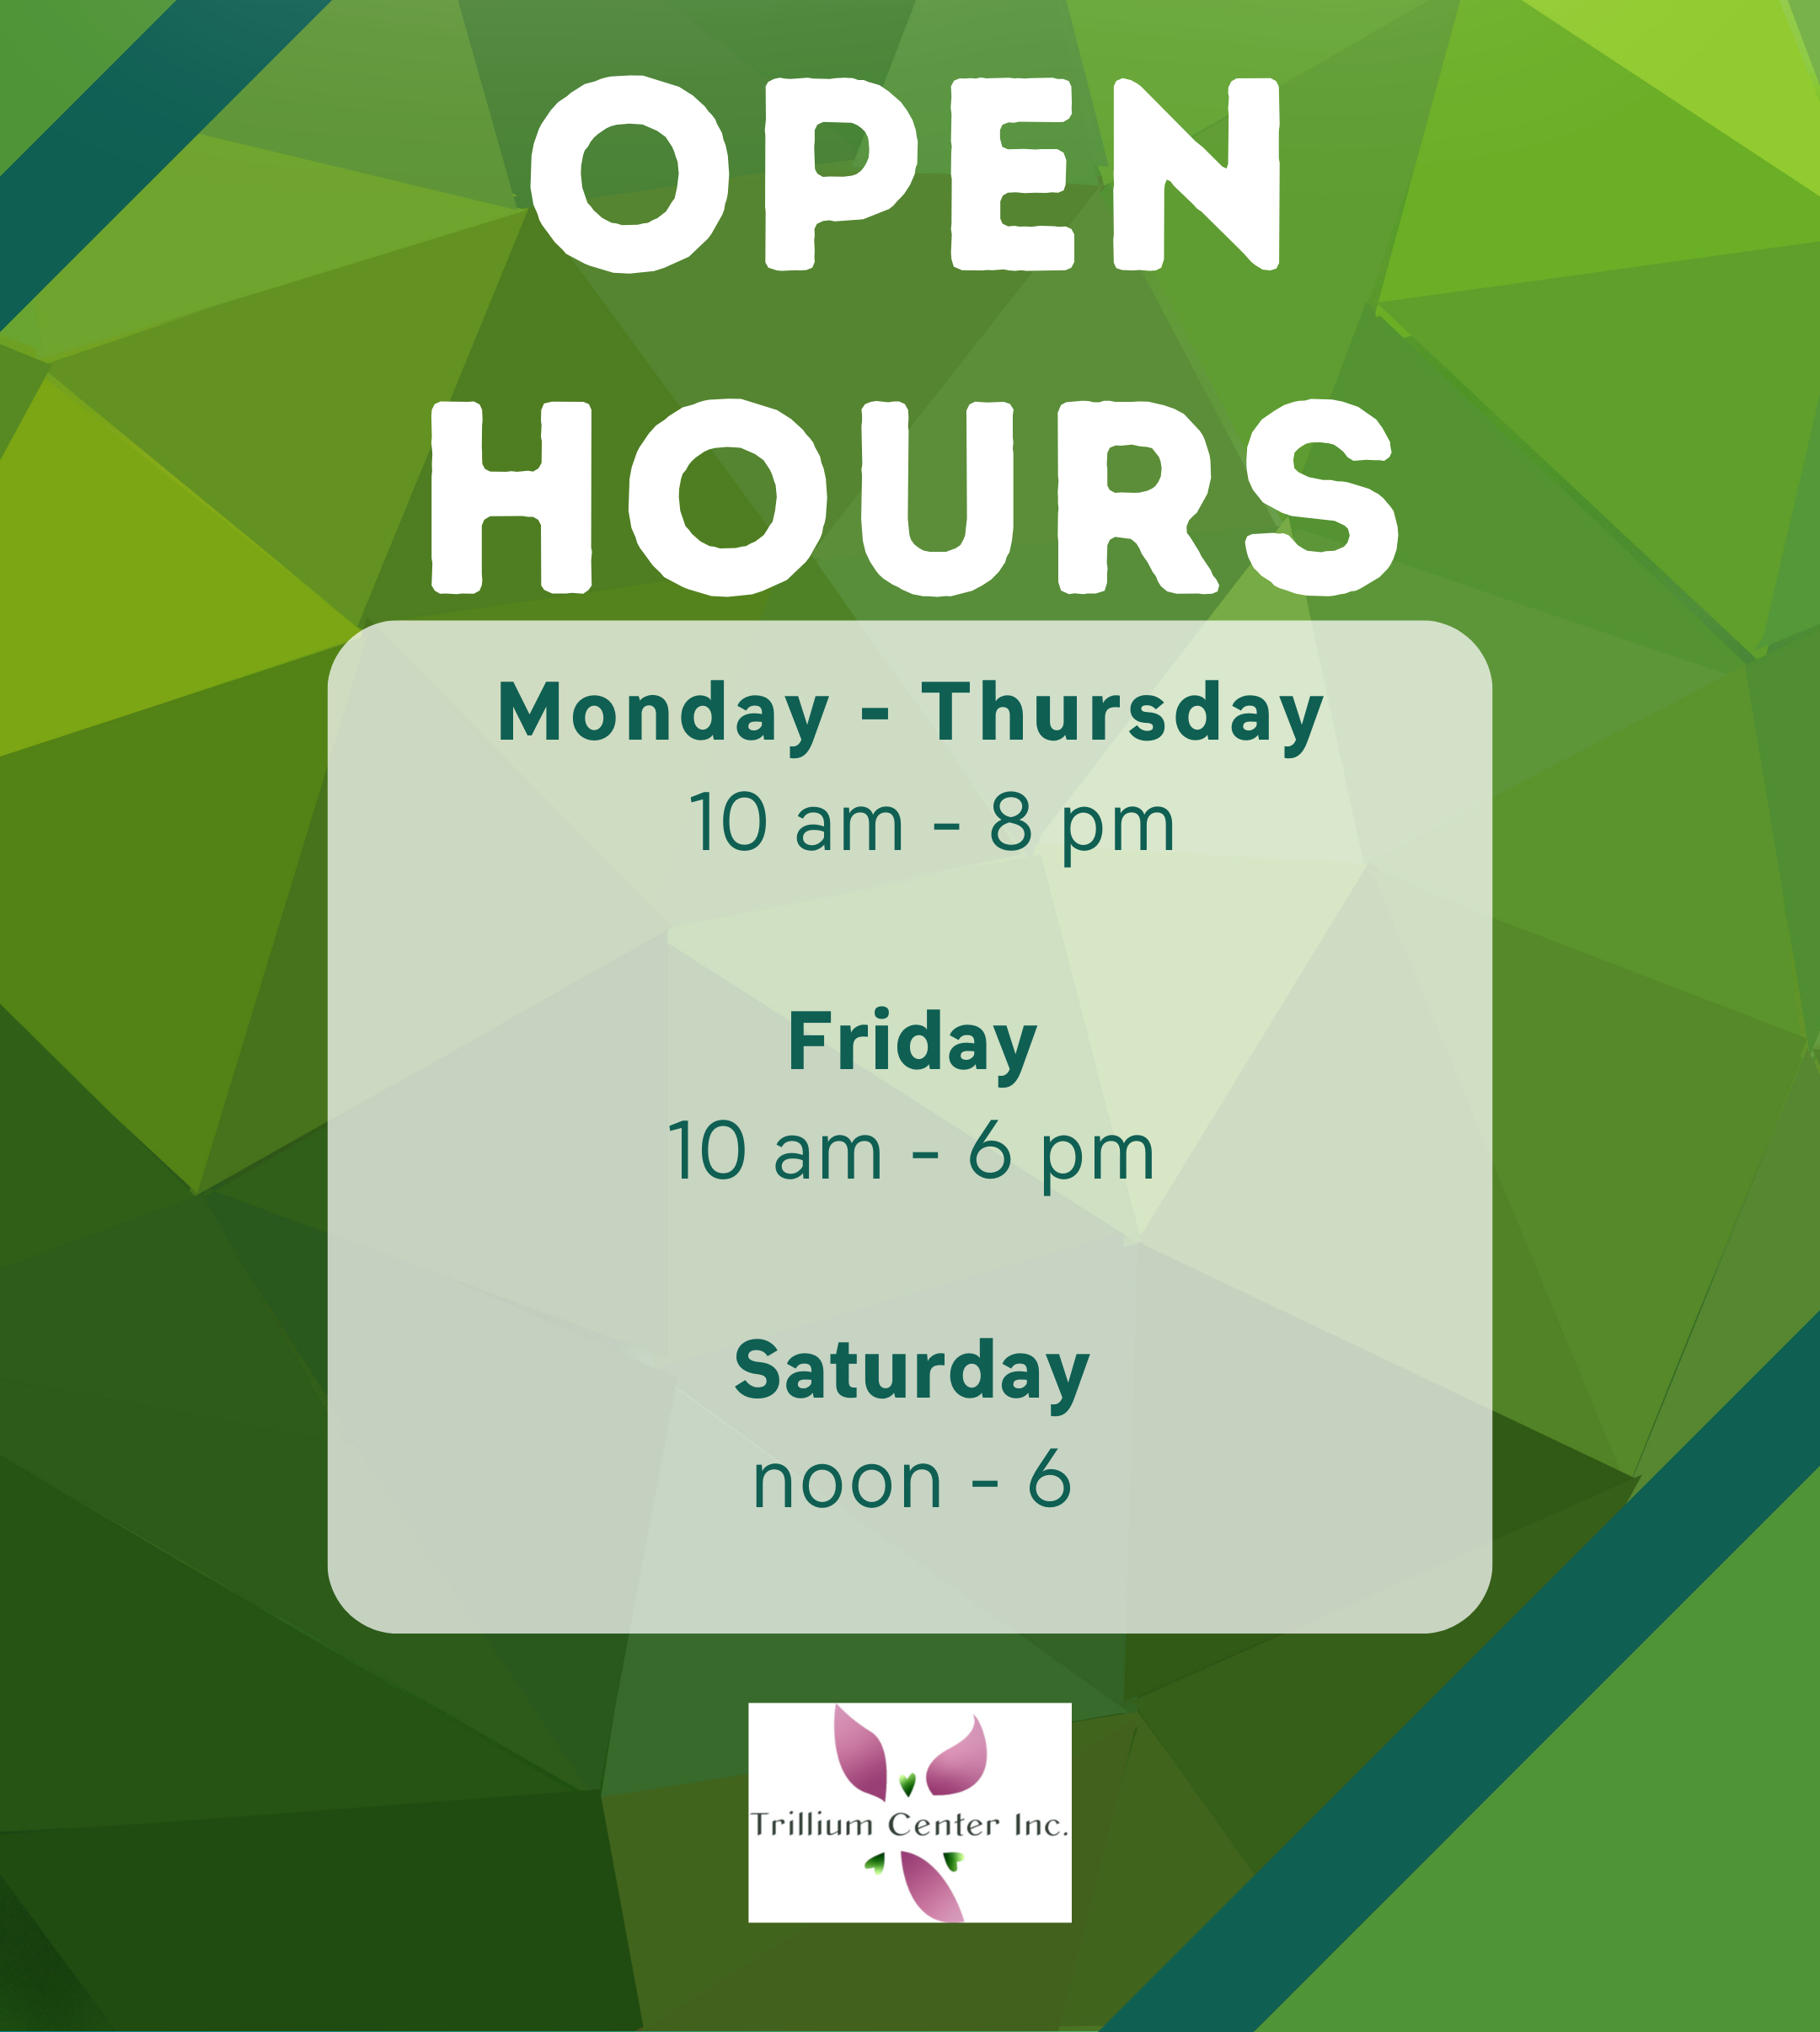 Open hours: Monday-Thursday 10am-8pm, Friday 10am-6pm, Saturday 12pm-6pm